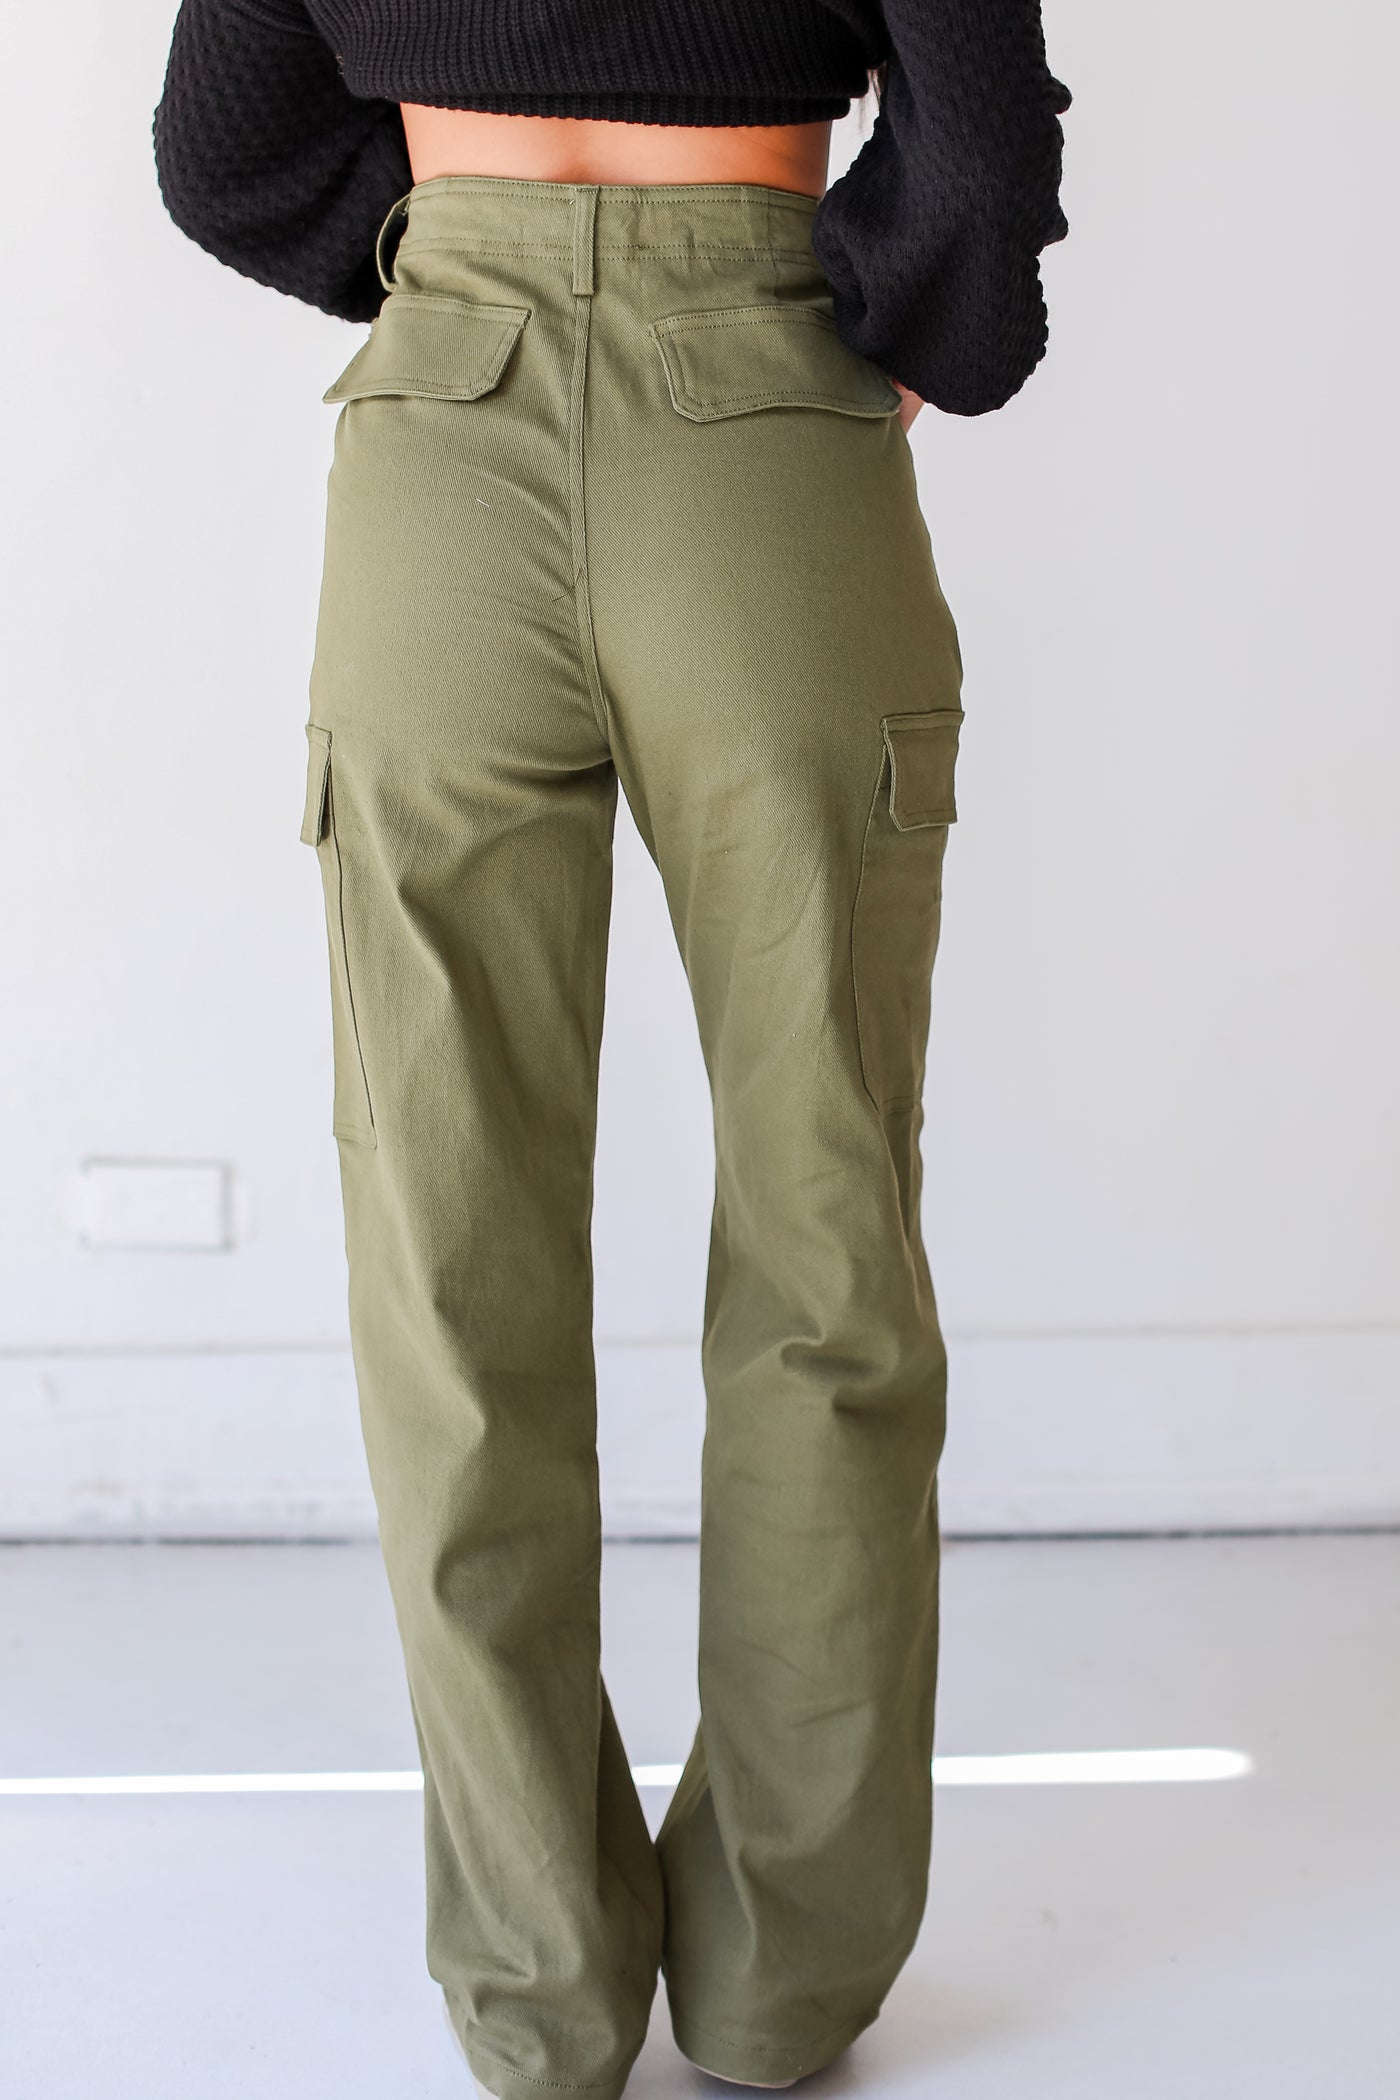 olive Cargo Jeans back view